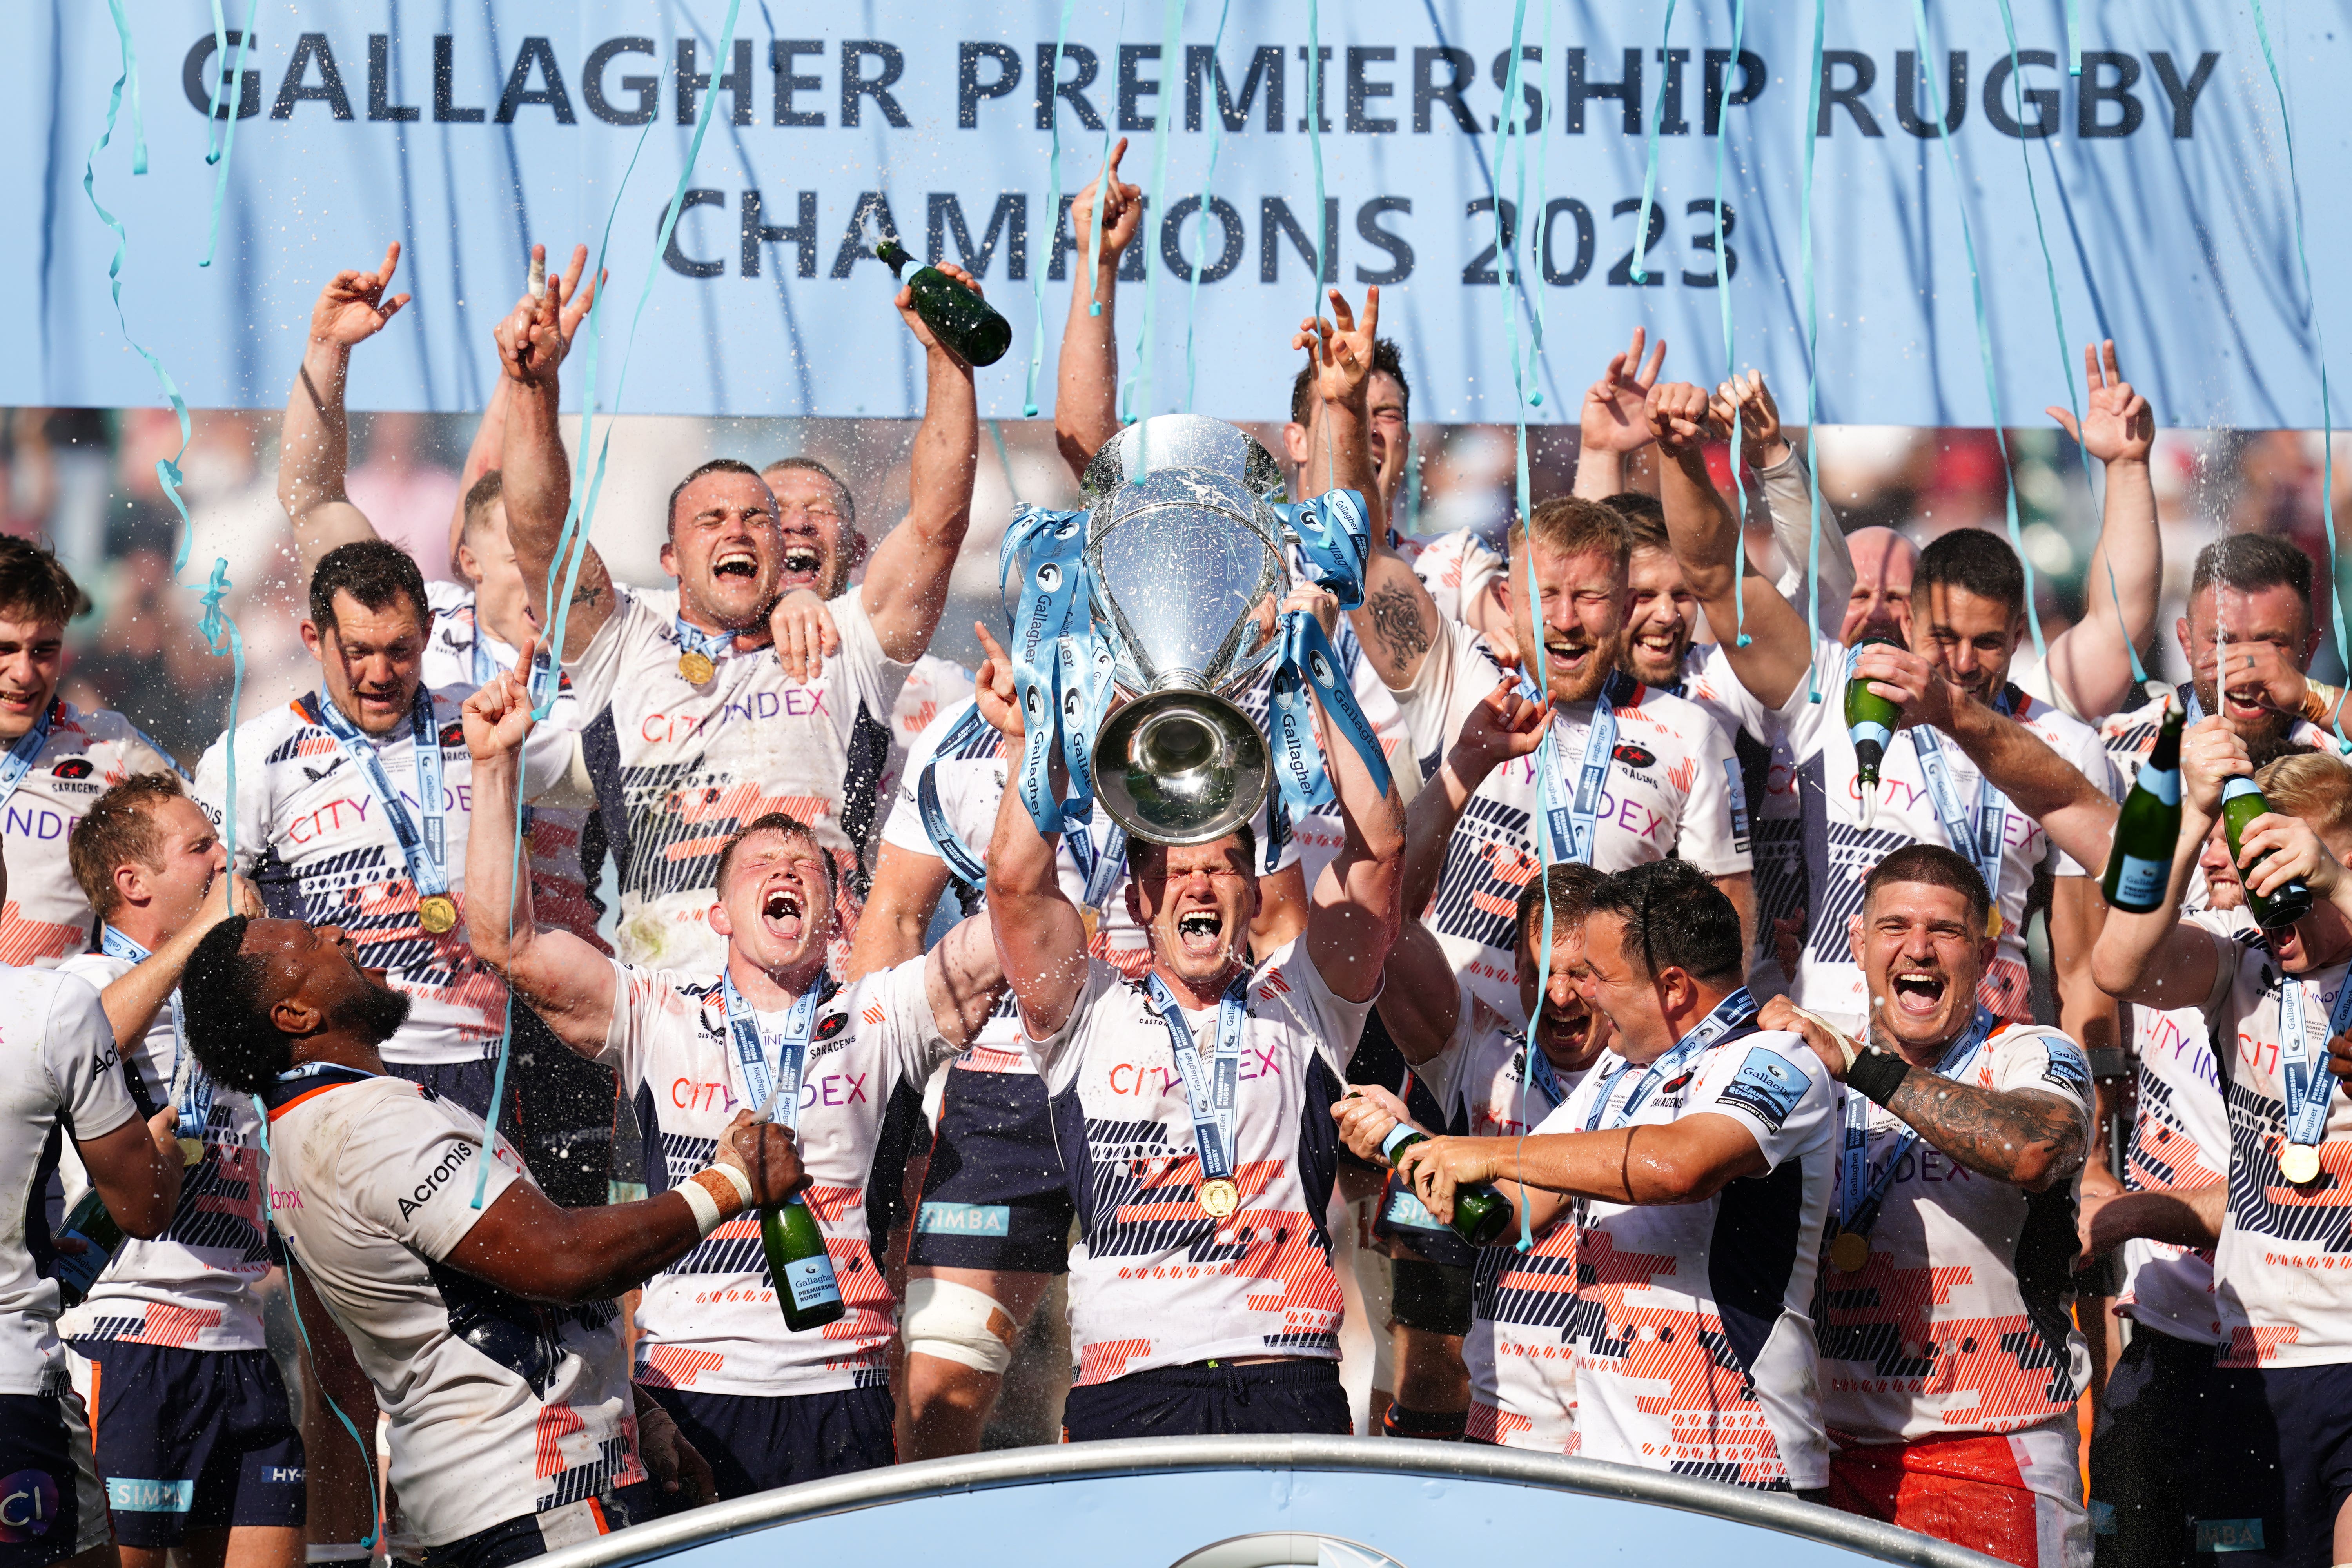 Saracens were crowned Premiership champions for a sixth time